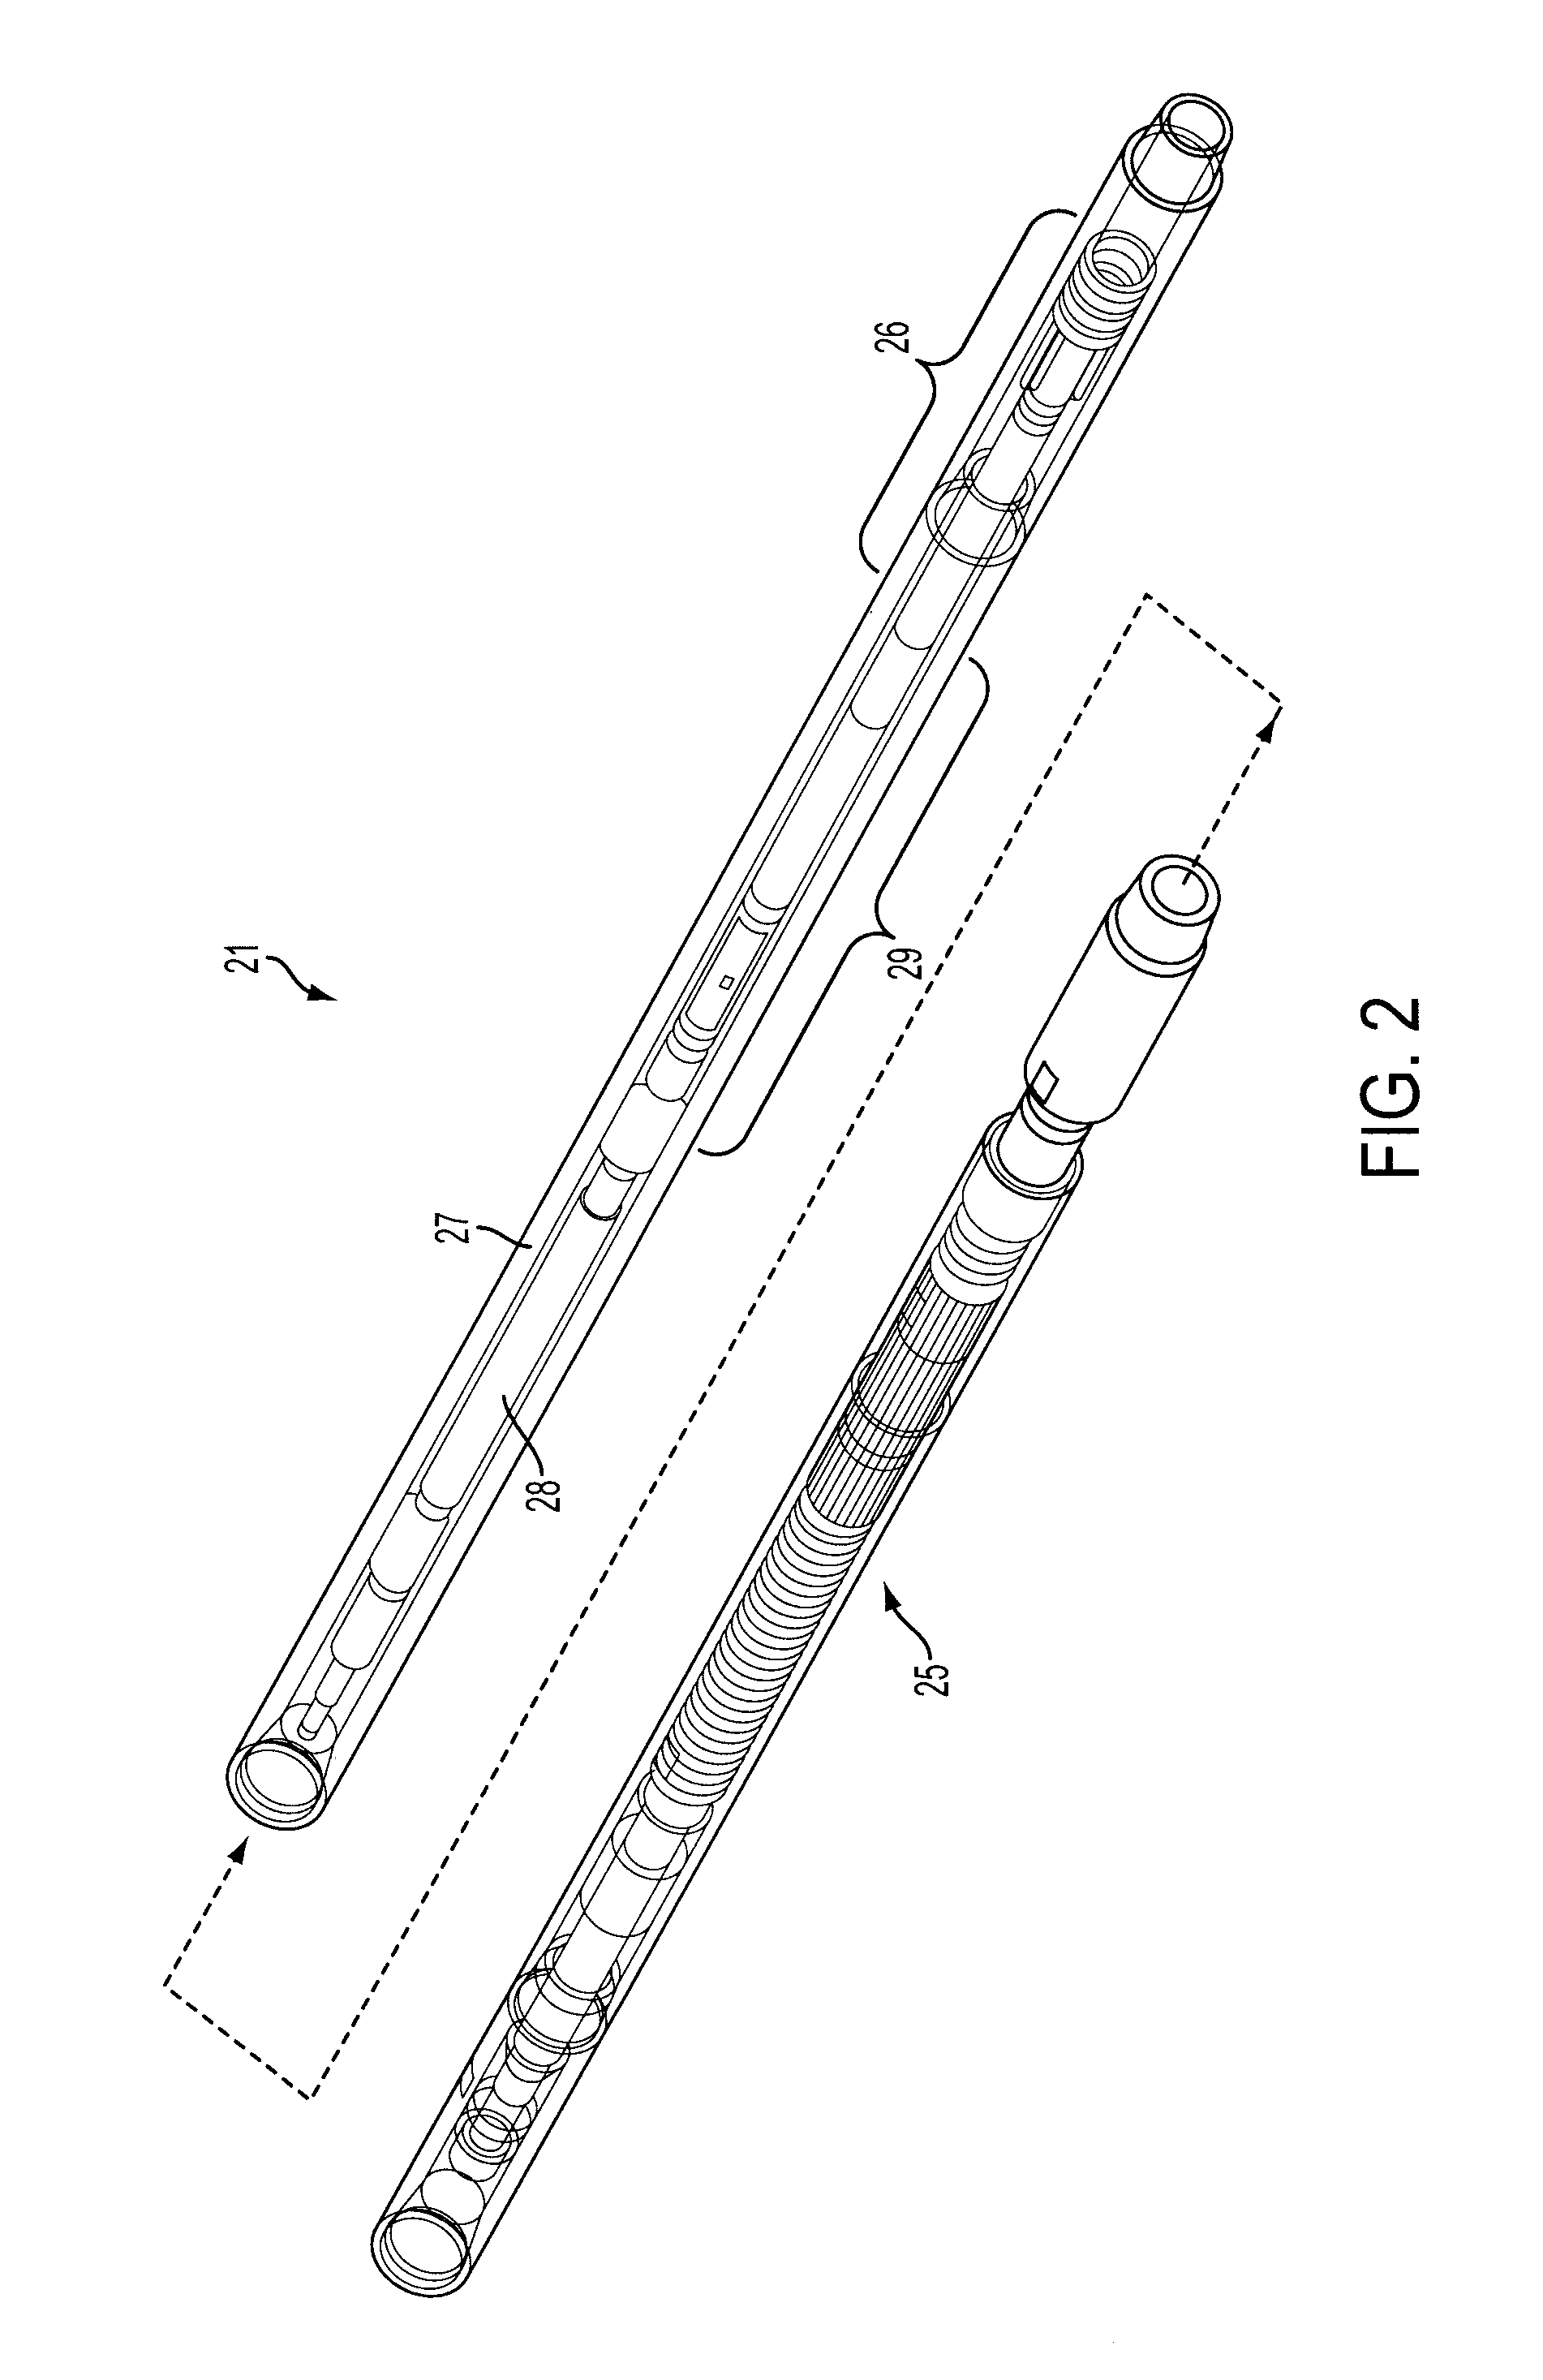 System, method and apparatus for drilling agitator